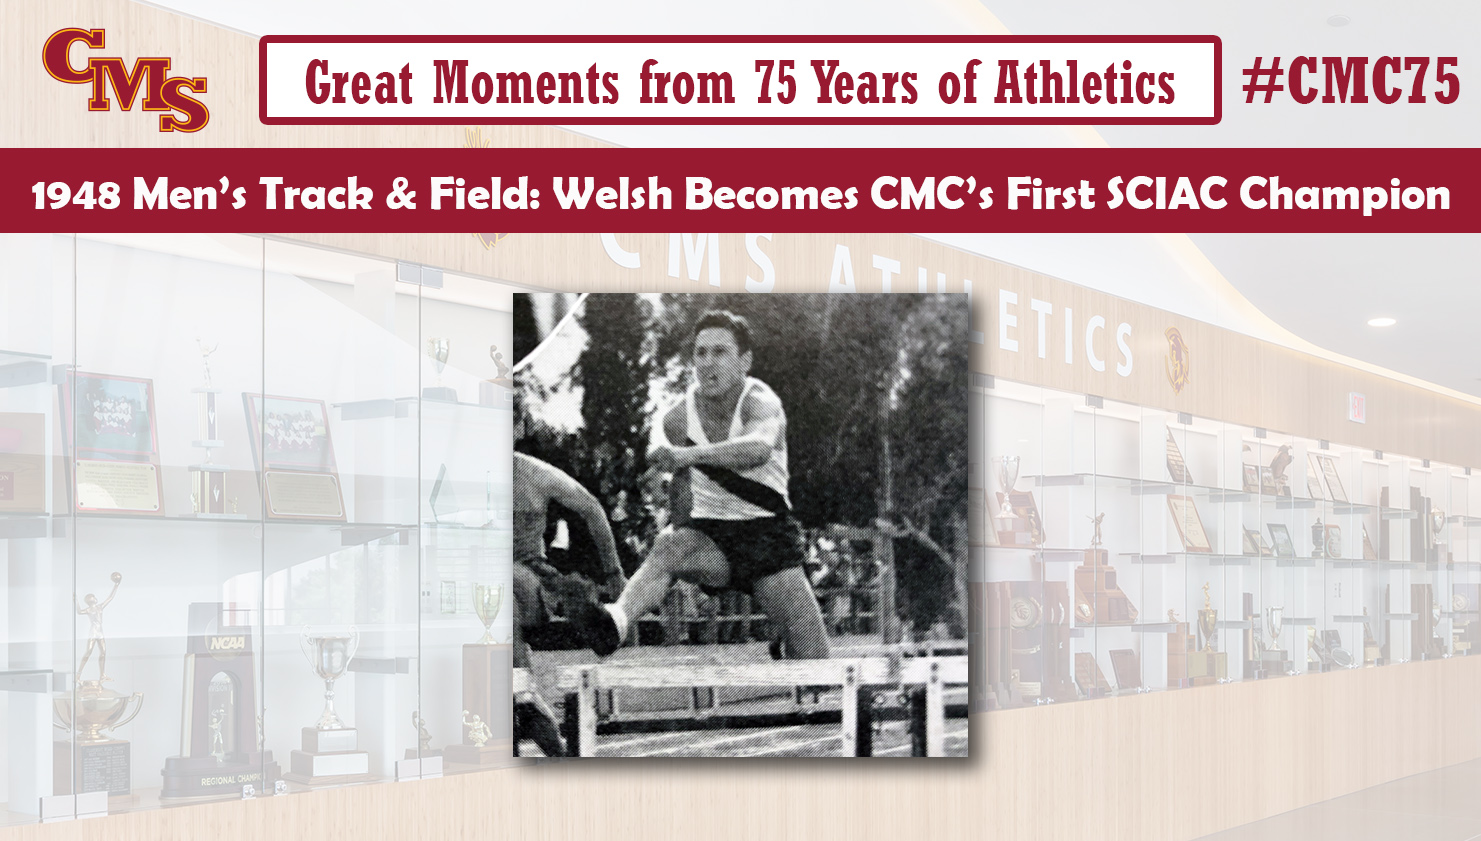 Pete Welsh clearing a hurdle for the Pomona-Claremont track and field team. Words over the photo read: Great Moments from 75 Years of Athletics. 1948 Men's Track and Field: Welsh Becomes CMC's First SCIAC Champion